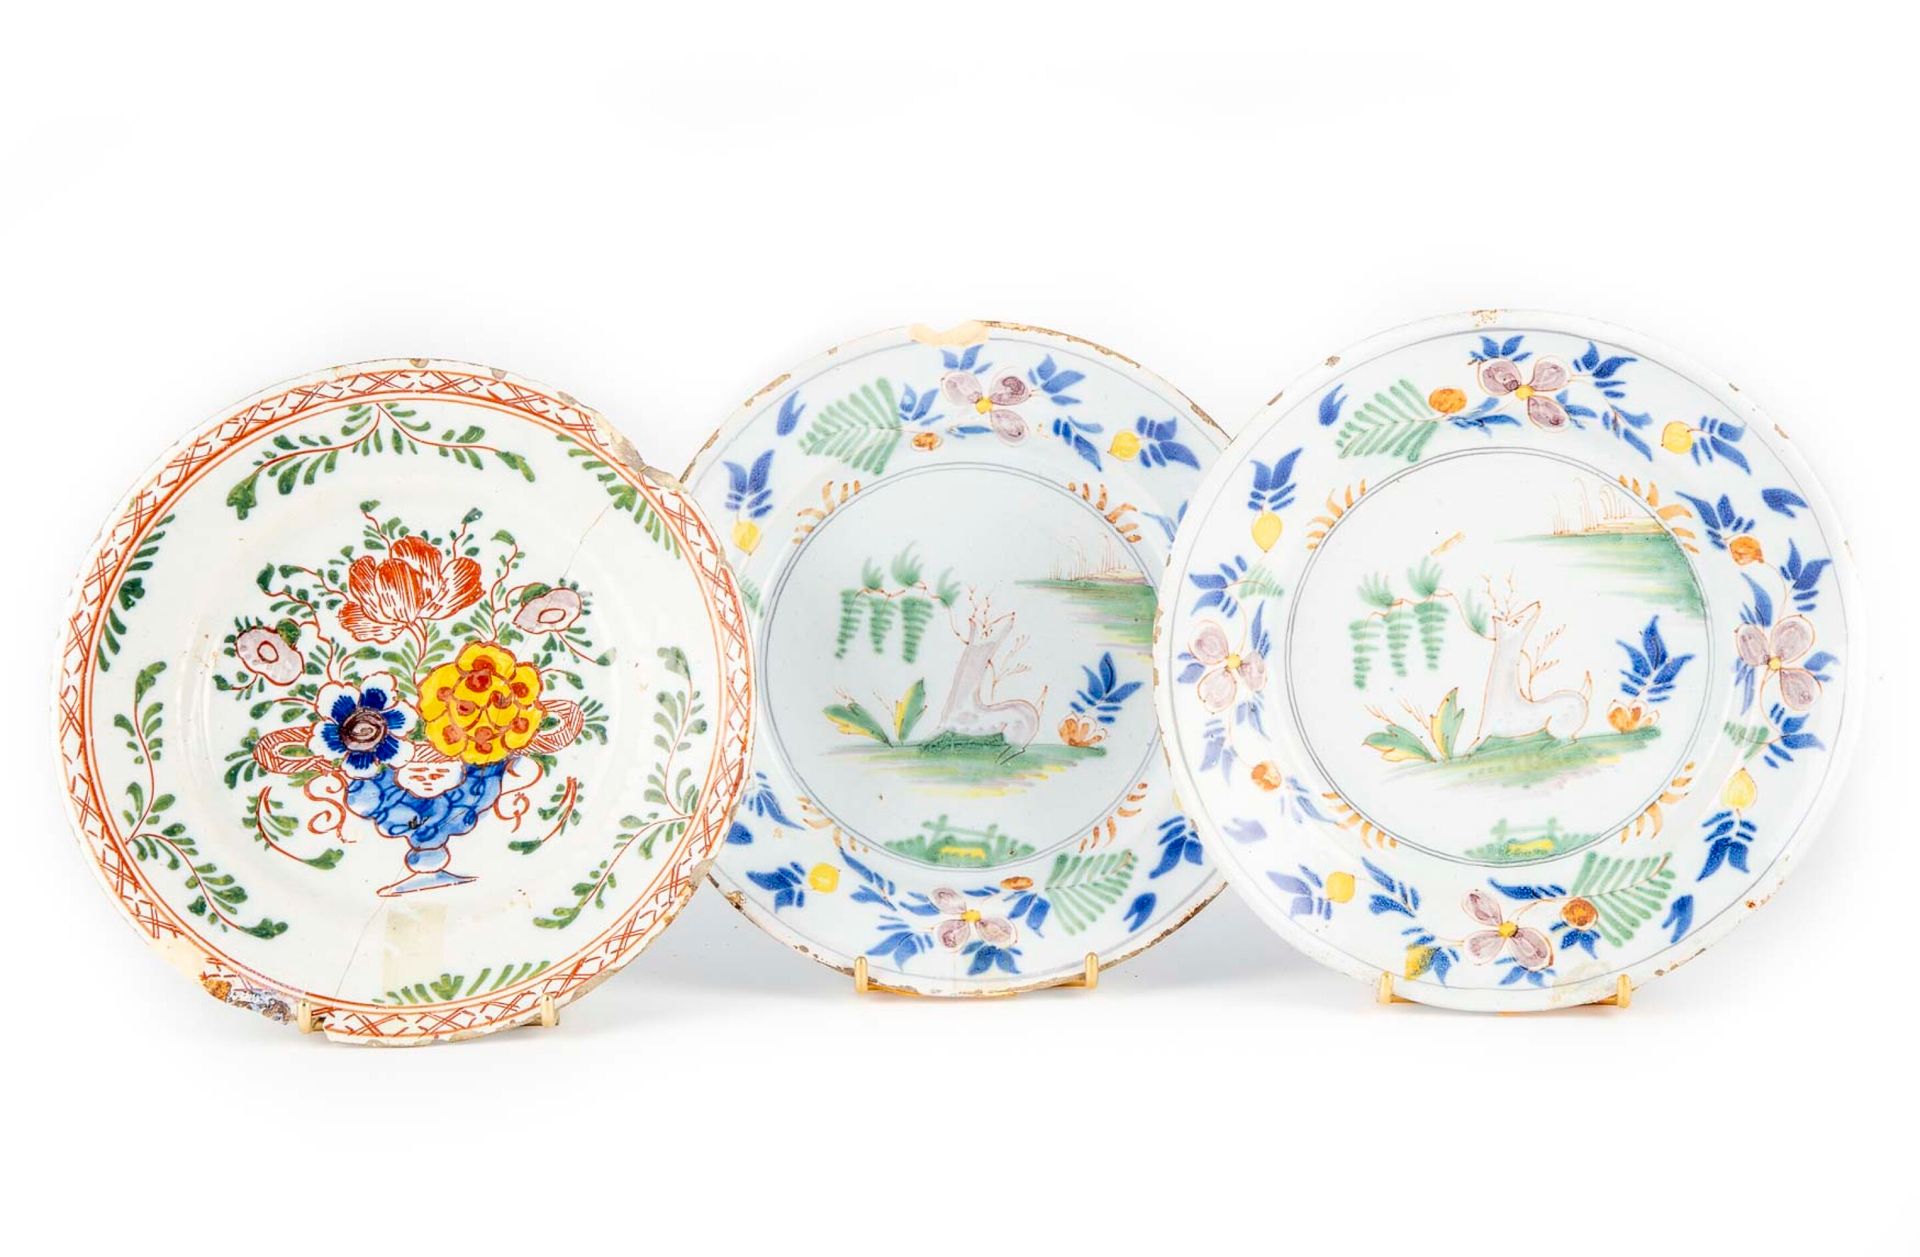 CHINE CHINA - East India Company

Three porcelain plates with polychrome decorat&hellip;